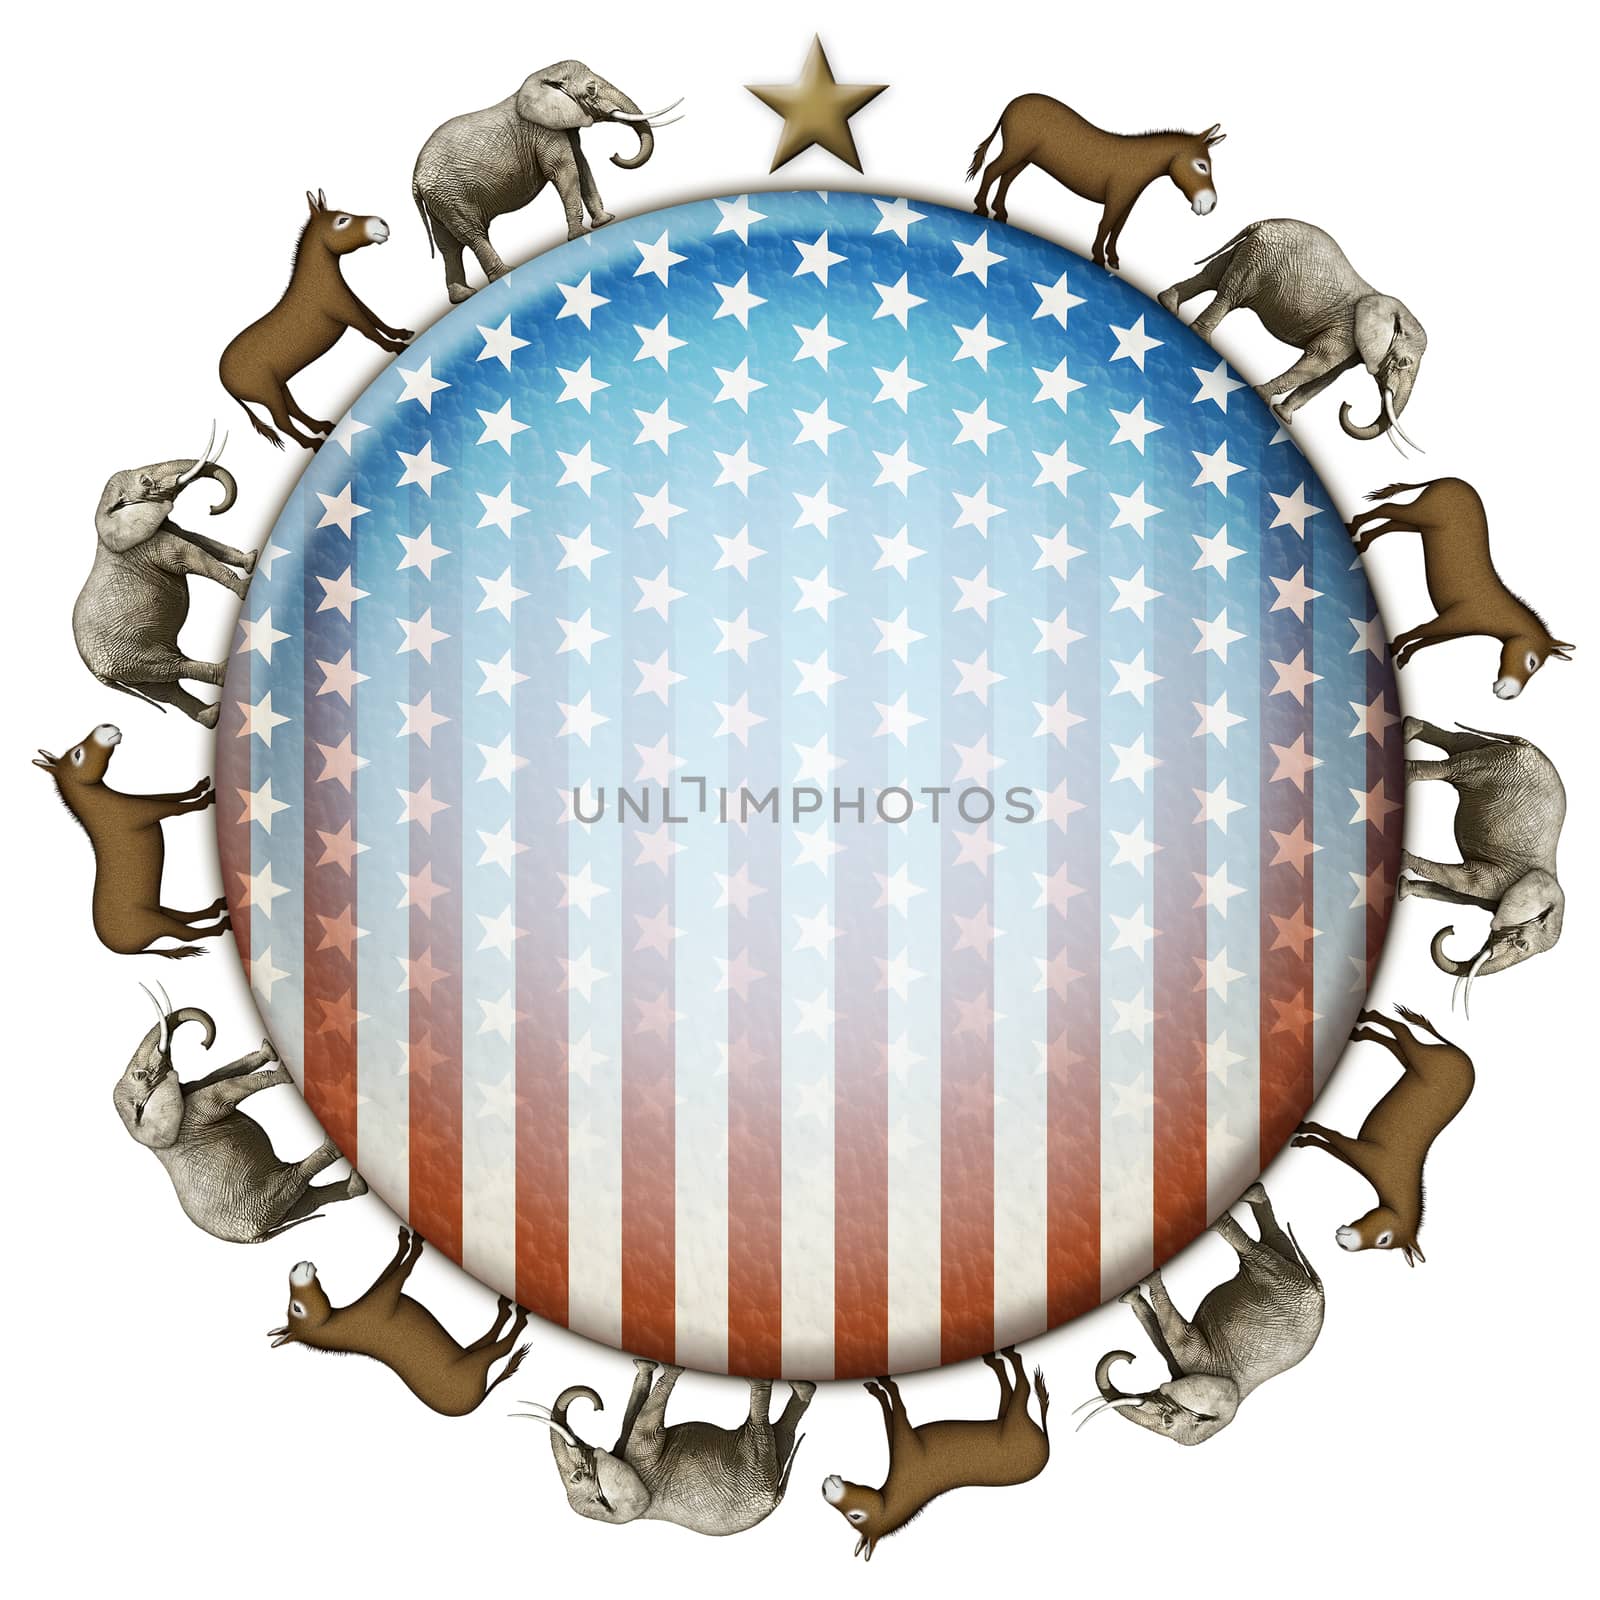 Election stars and stripes button with elephants and donkeys representing the Democratic and Republican parties.